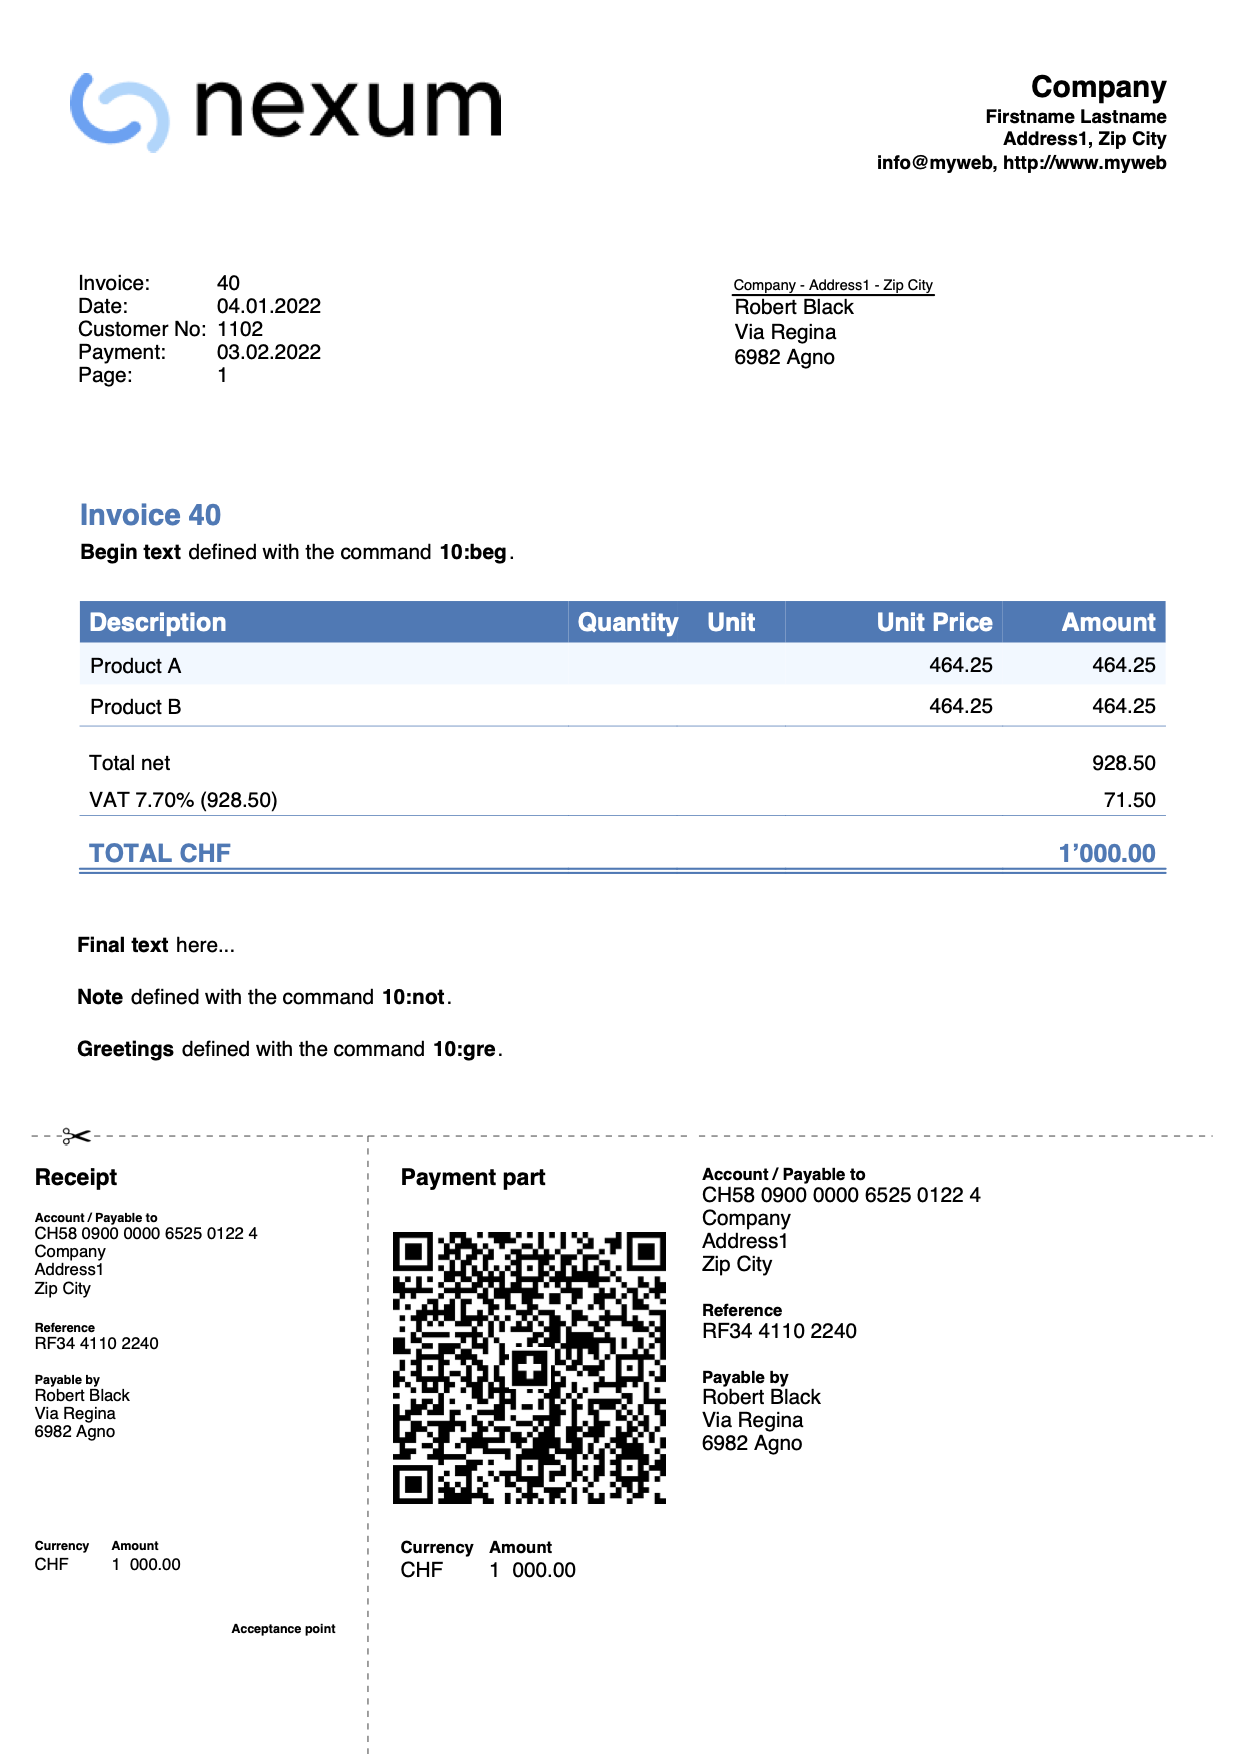 tutorial qr invoice begin and final texts